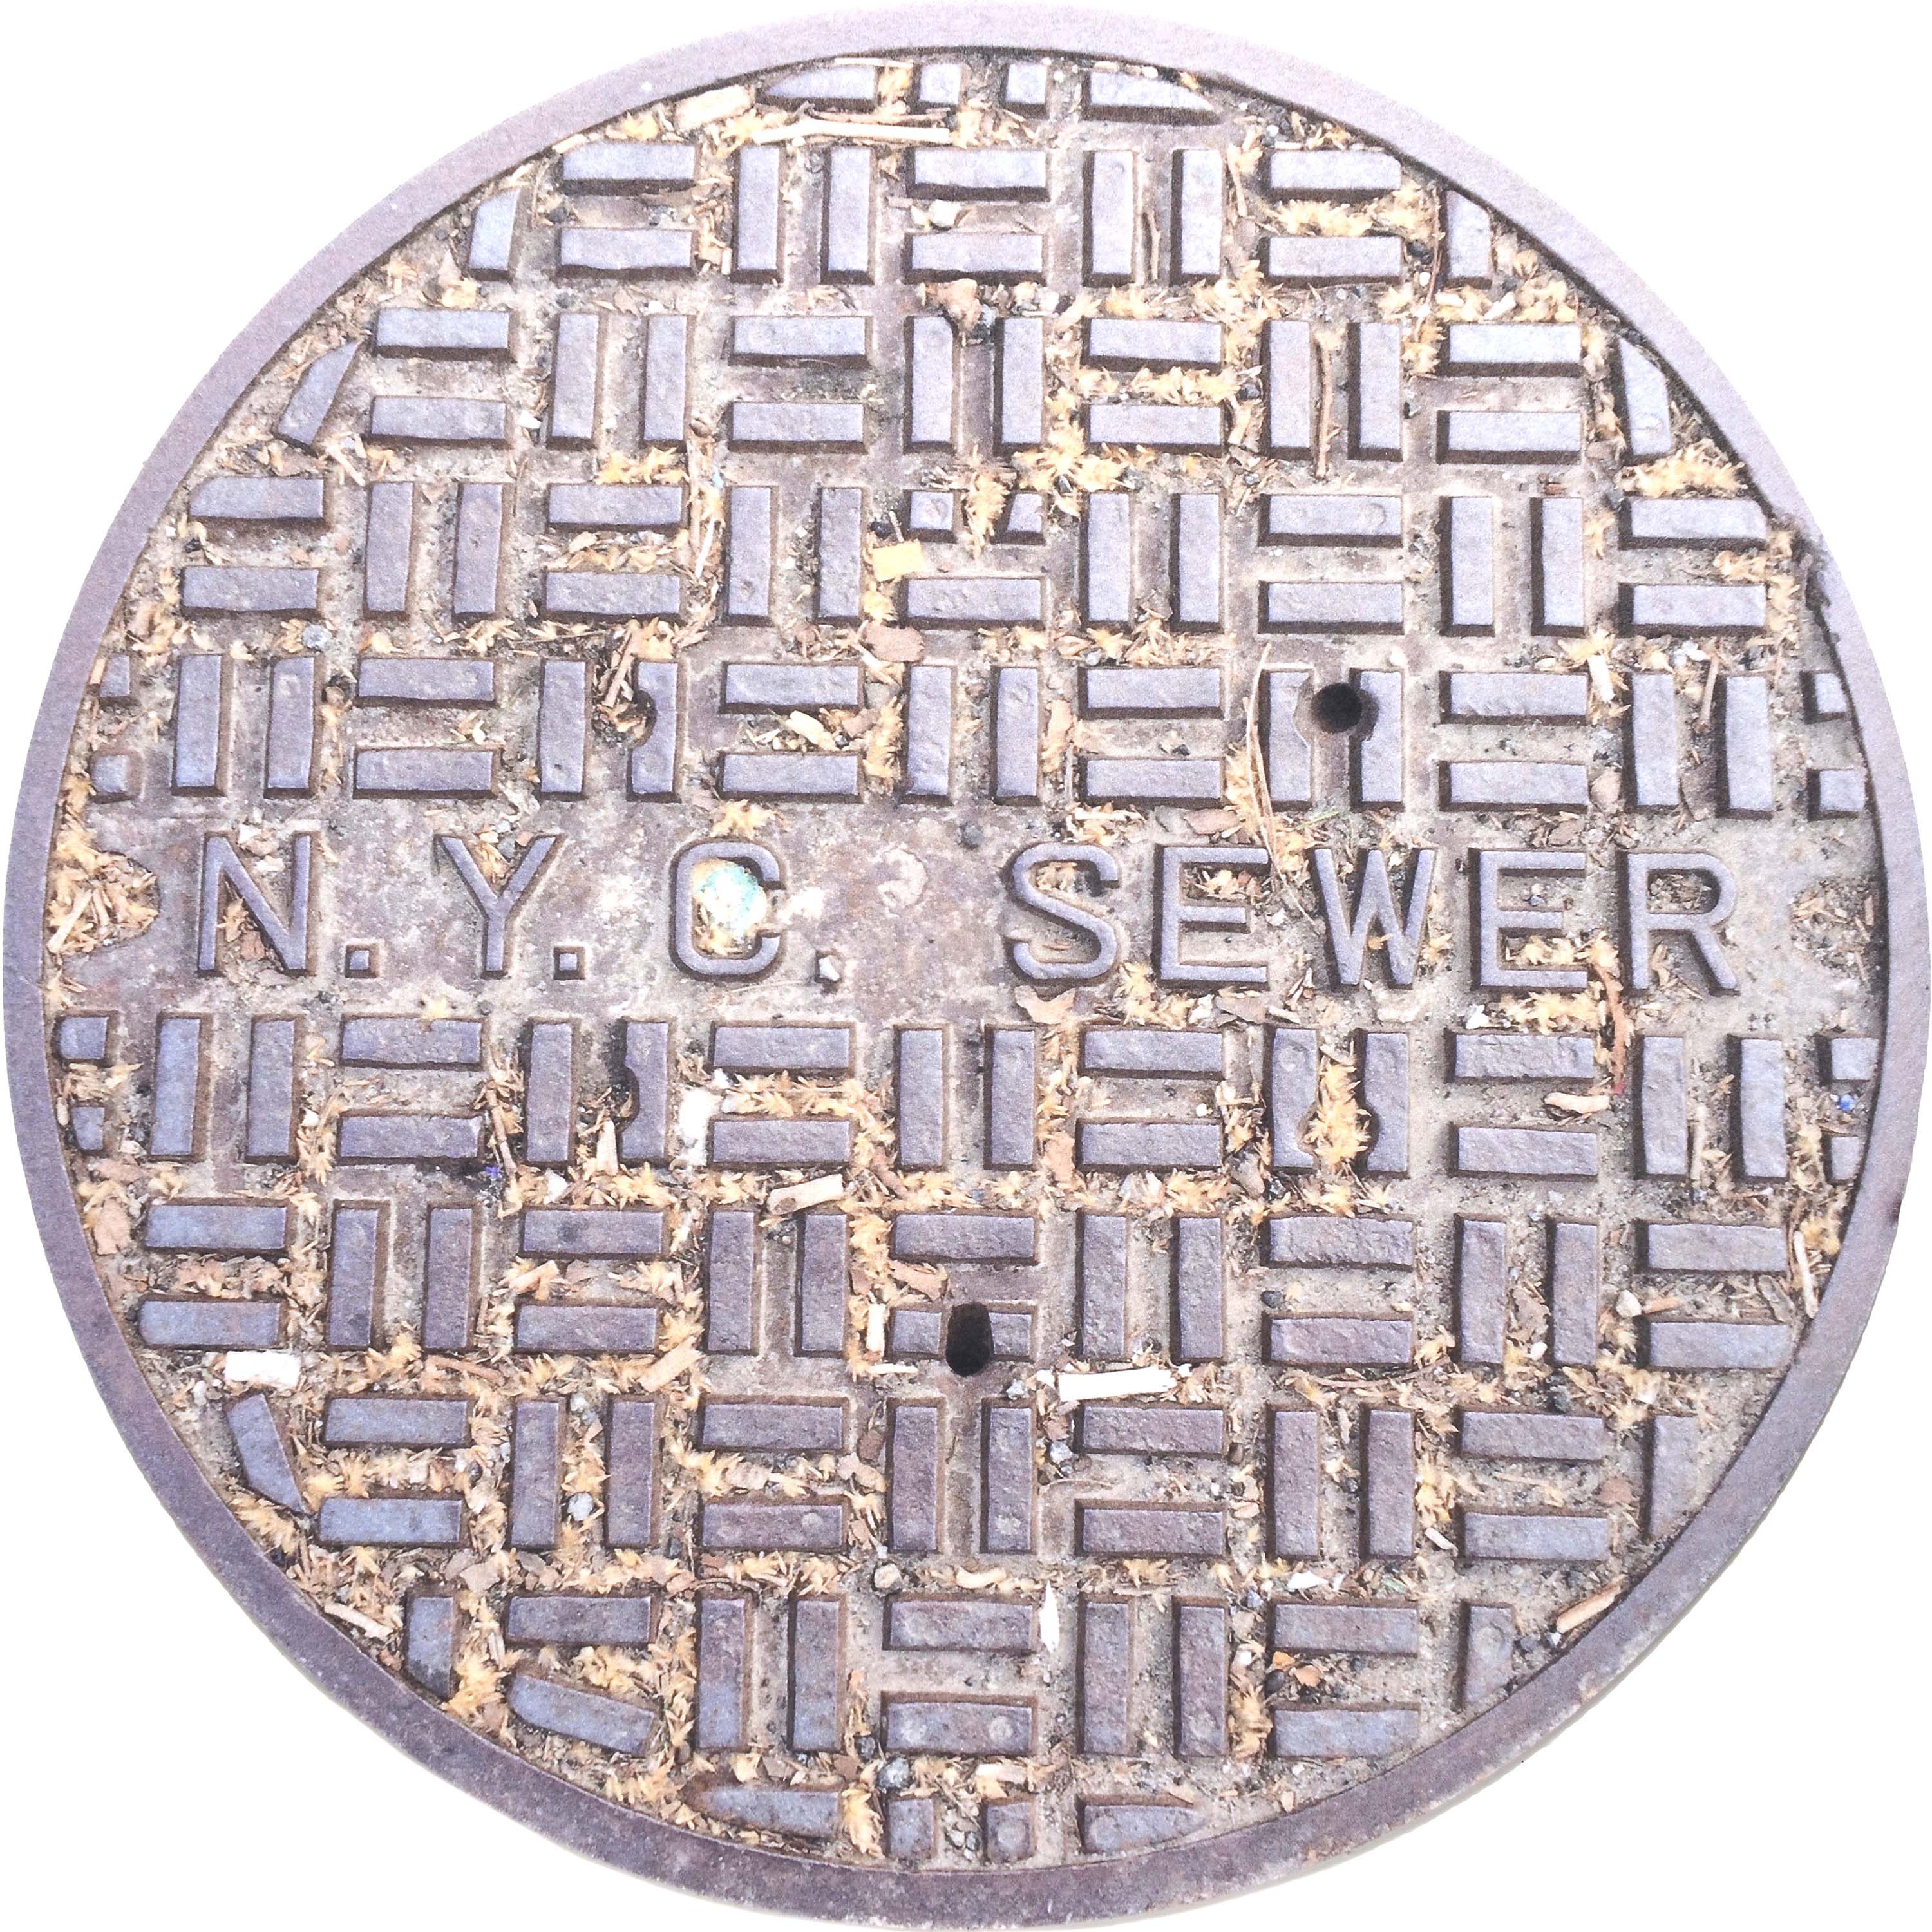 NYC SERIES - Sewer Cover Doormat, Trivet, Coaster - Sawdust - New York, NY